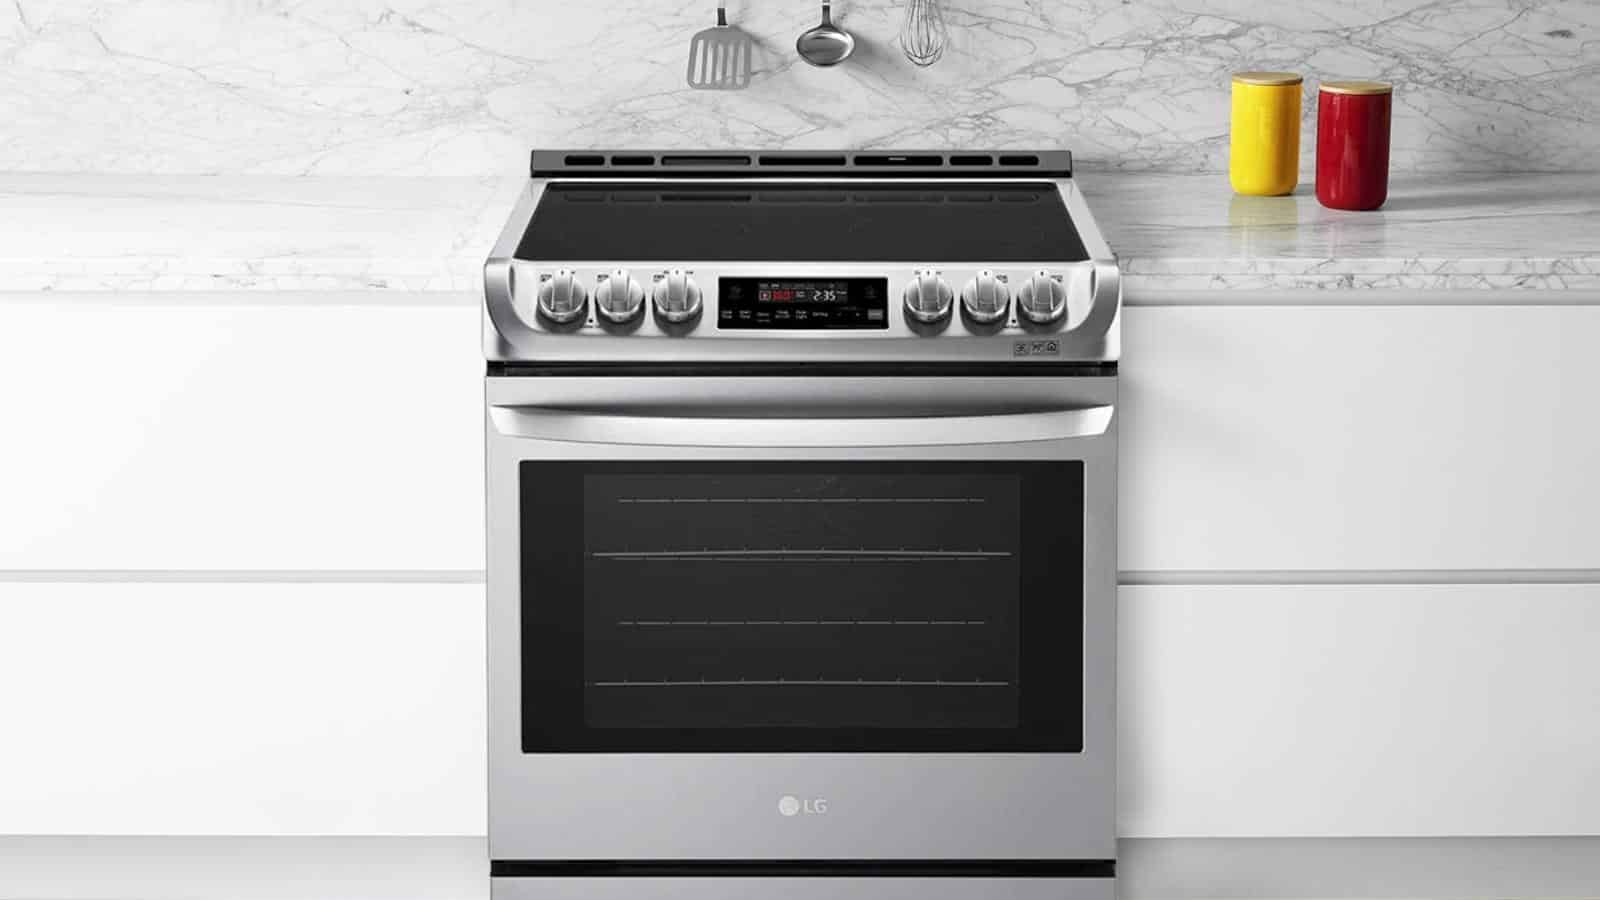 LG Electric Oven Takes Long Time Preheat